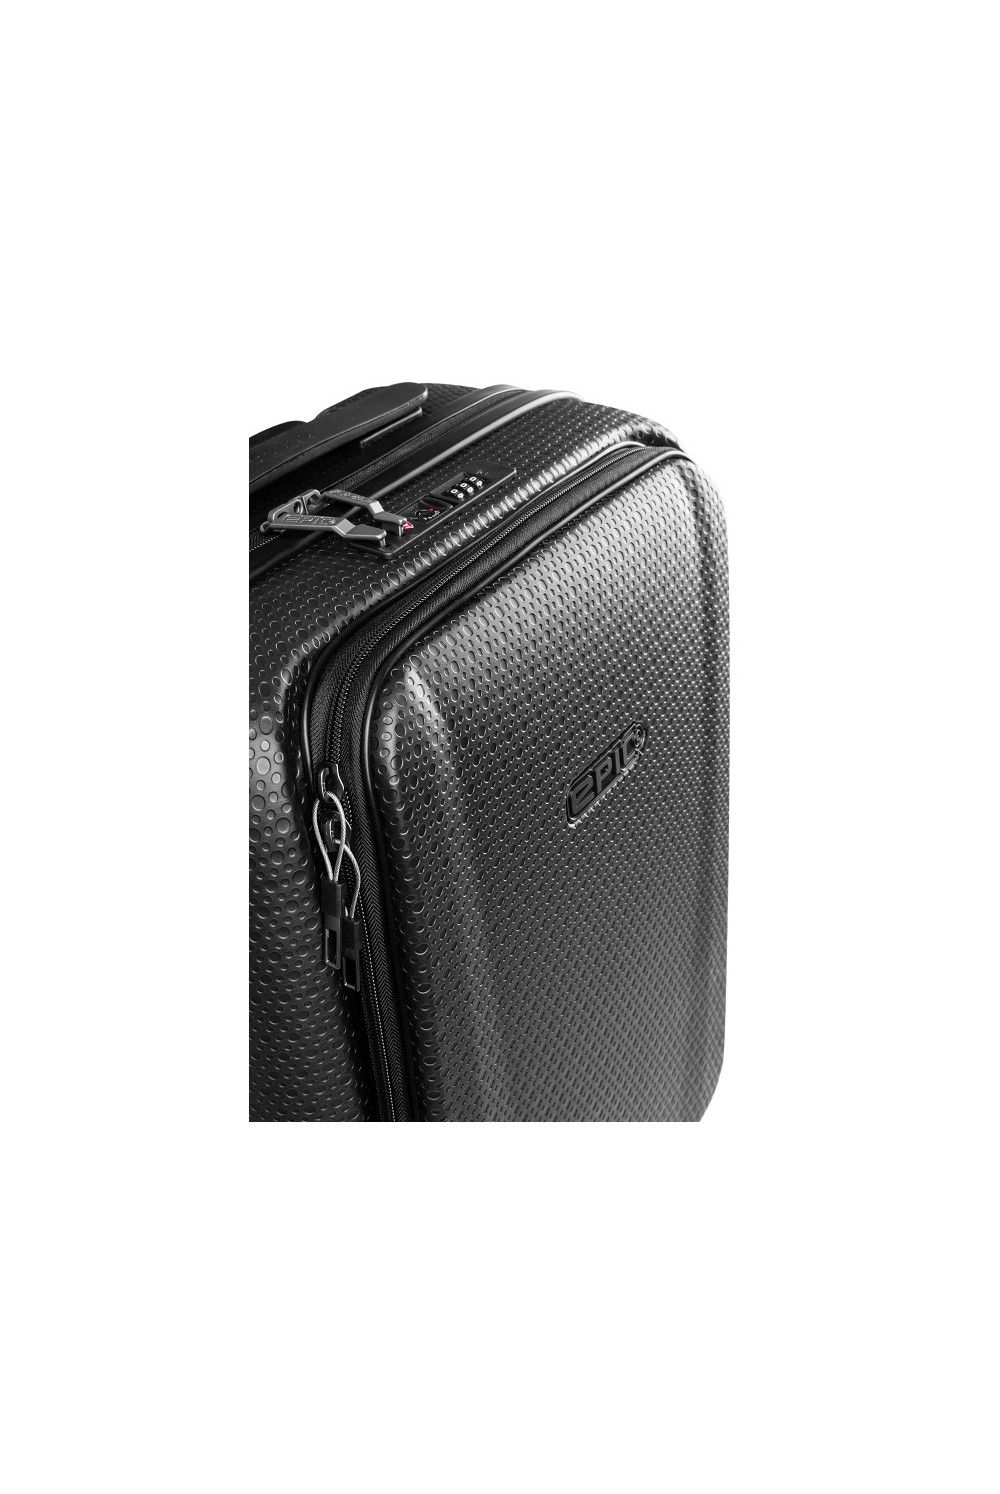 Hand luggage suitcase Epic GTO 5 55cm outer compartment